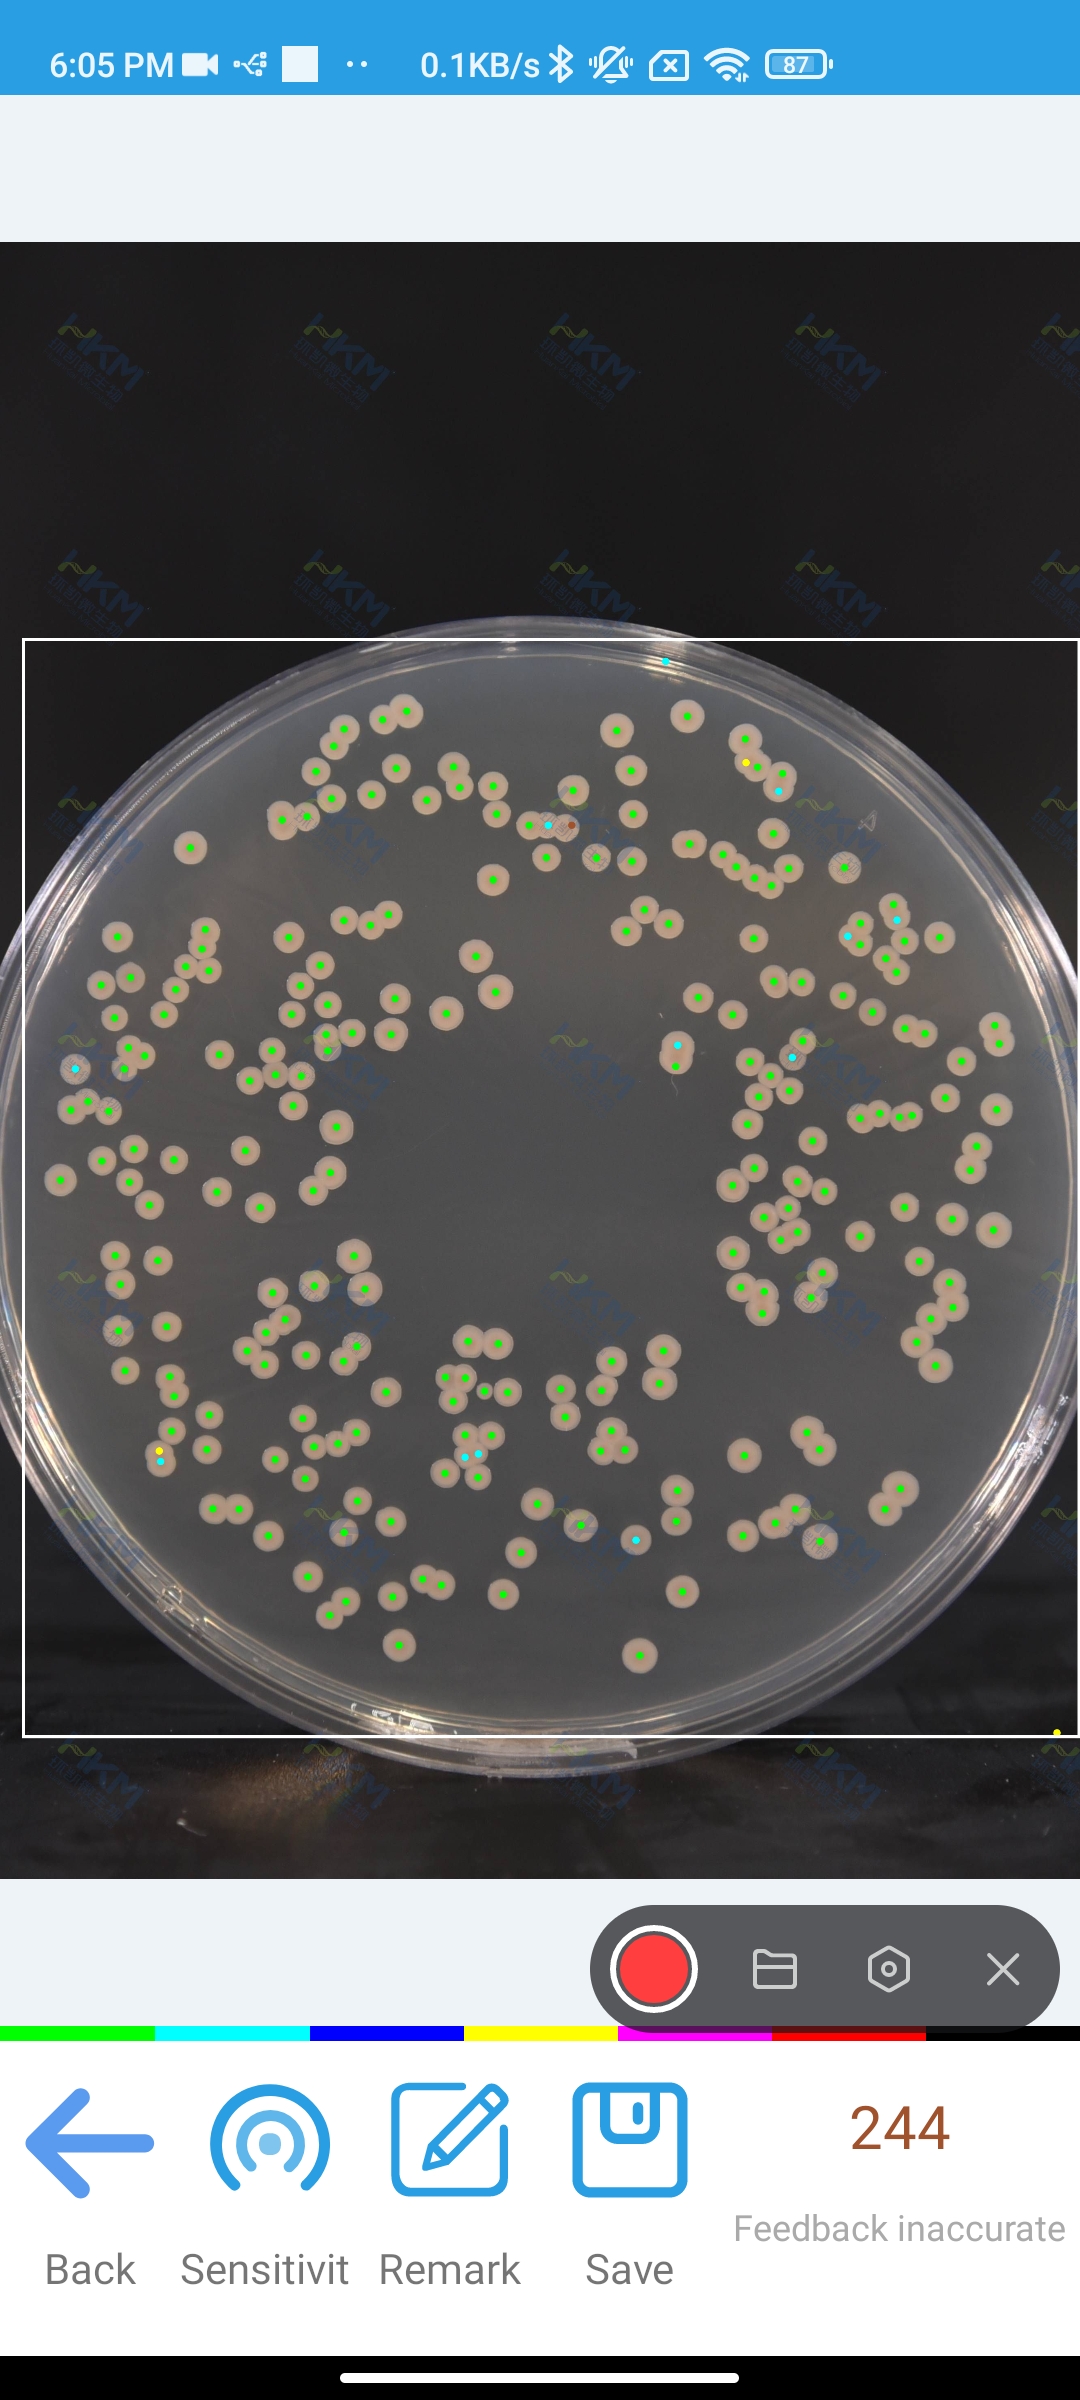 Automated counting of bacterial colonies on agar plates based on images